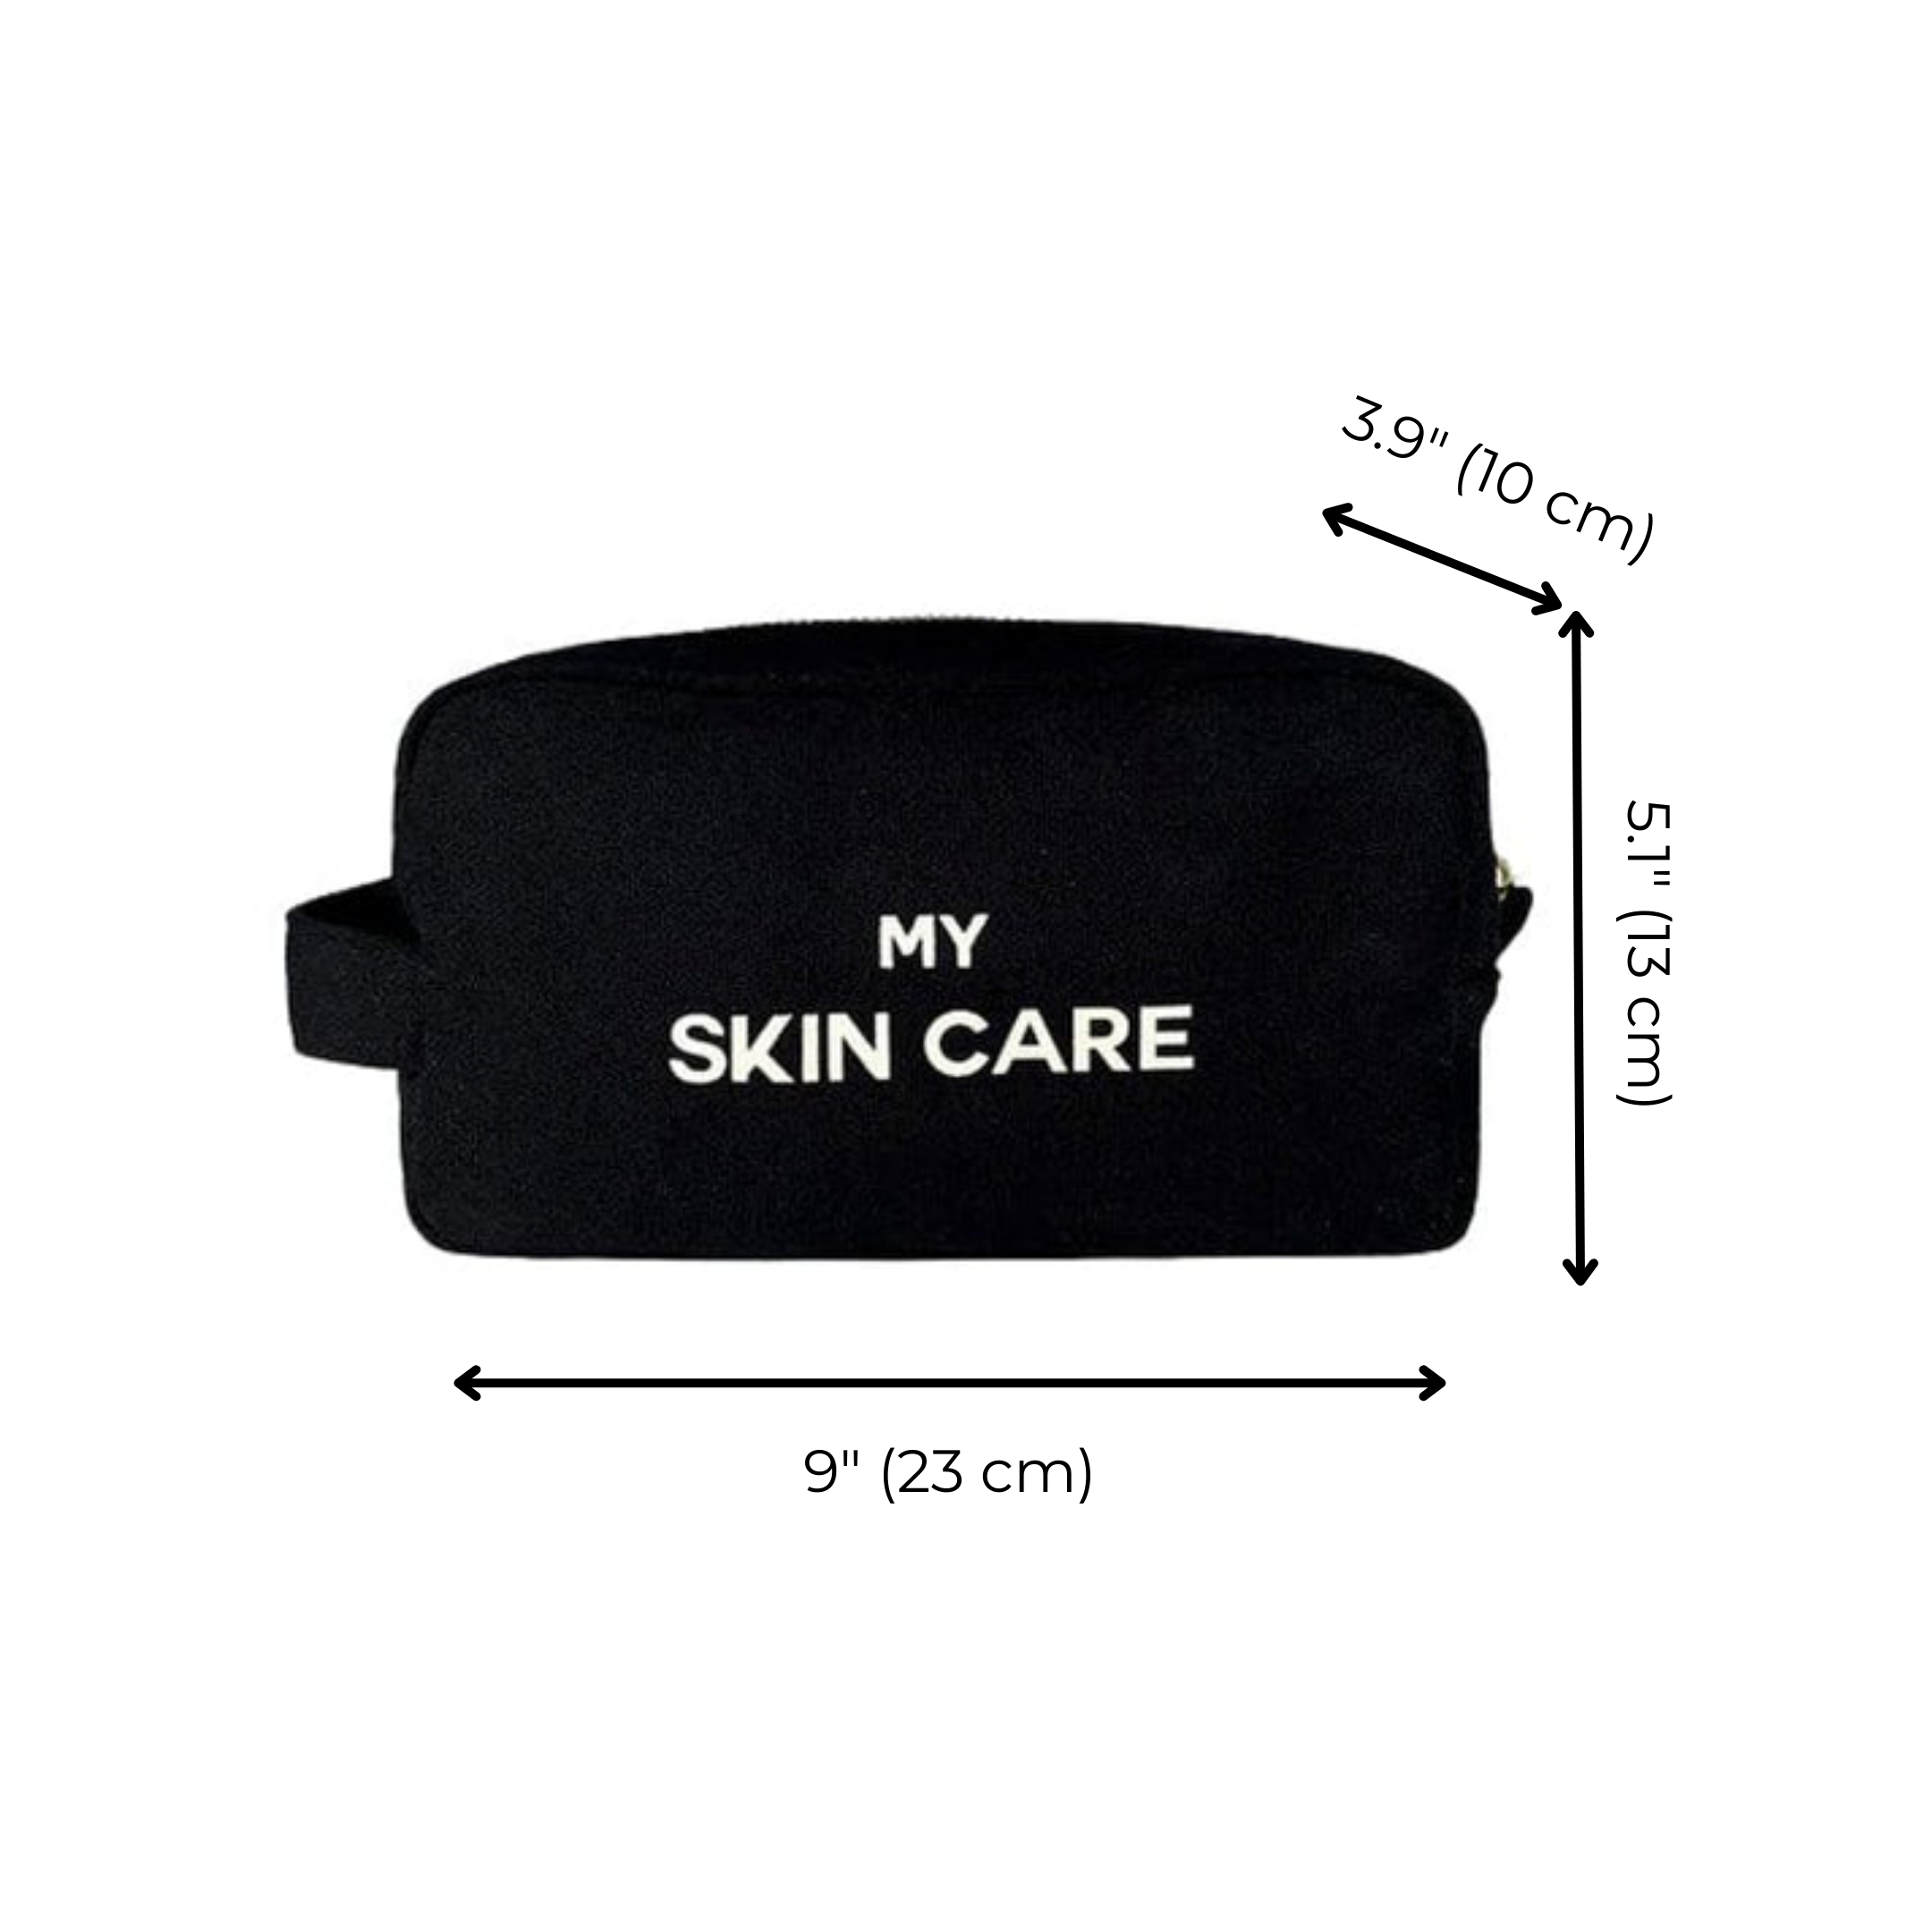 My Skin Care - Organizing Pouch, Black | Bag-all